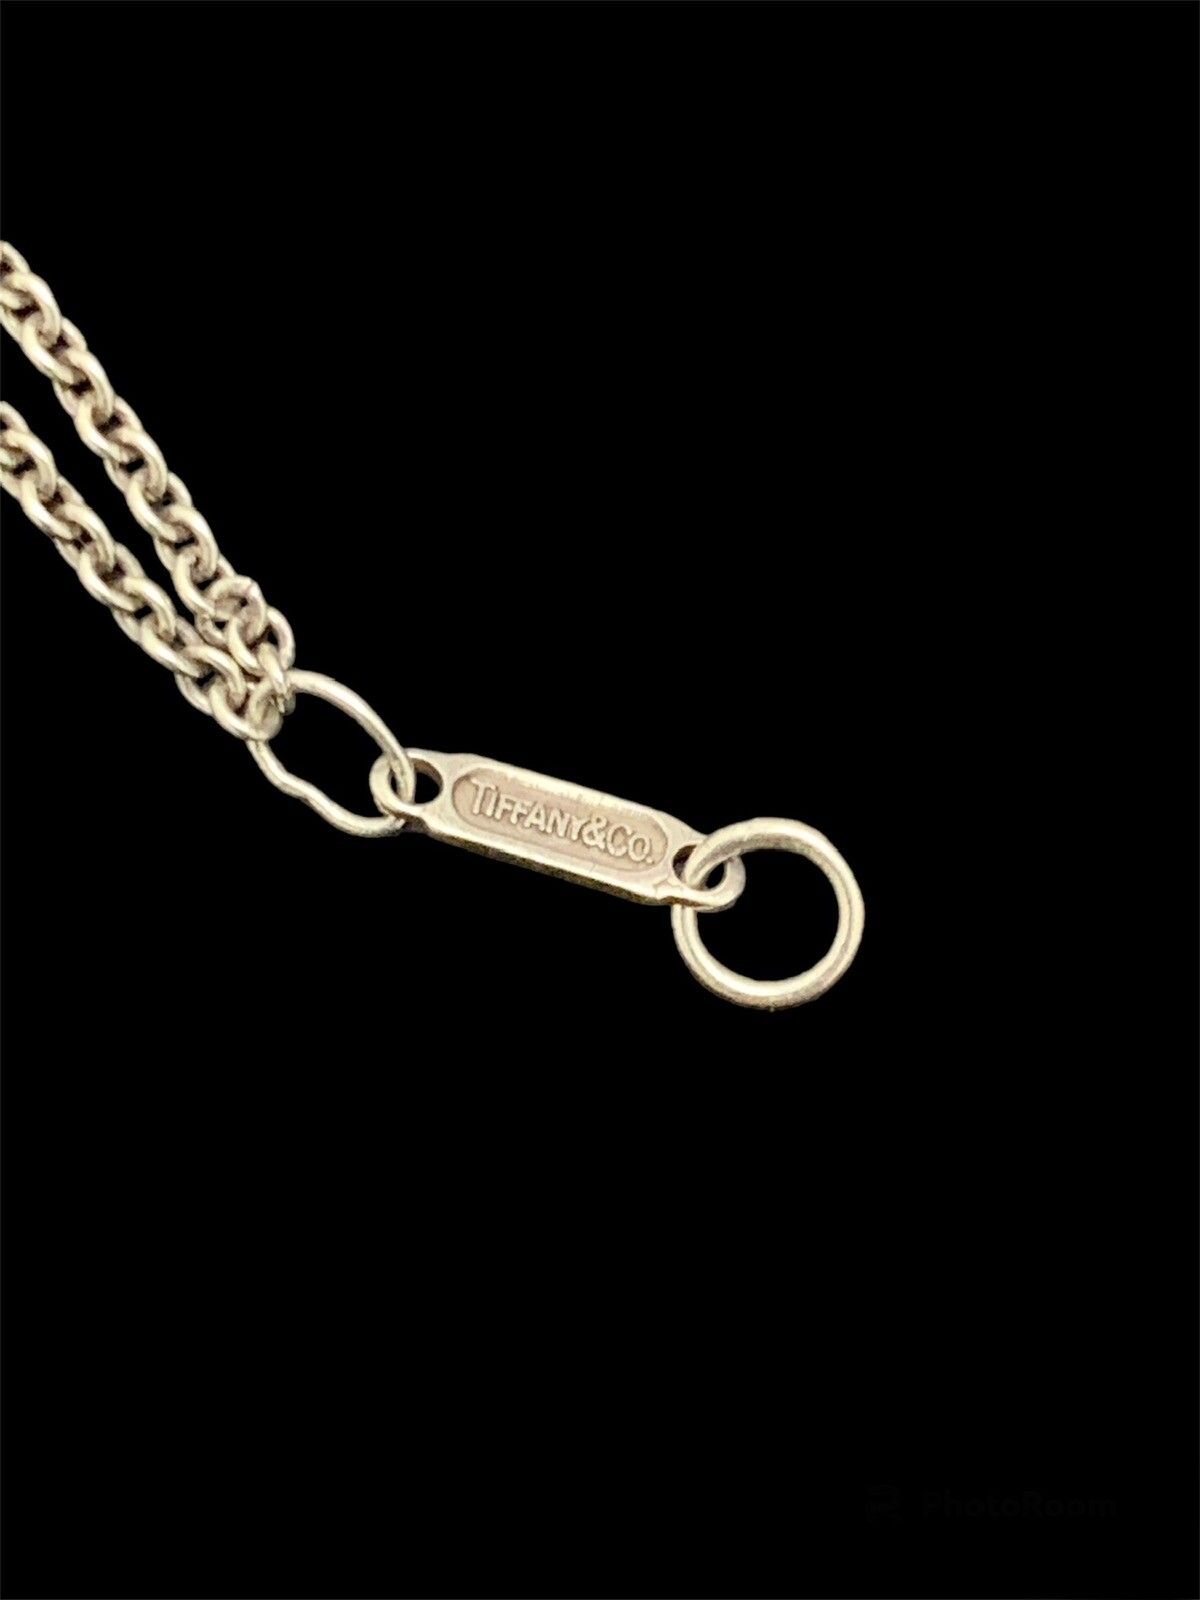 Tiffany Infinity Pendant Silver Necklace 925 - 2